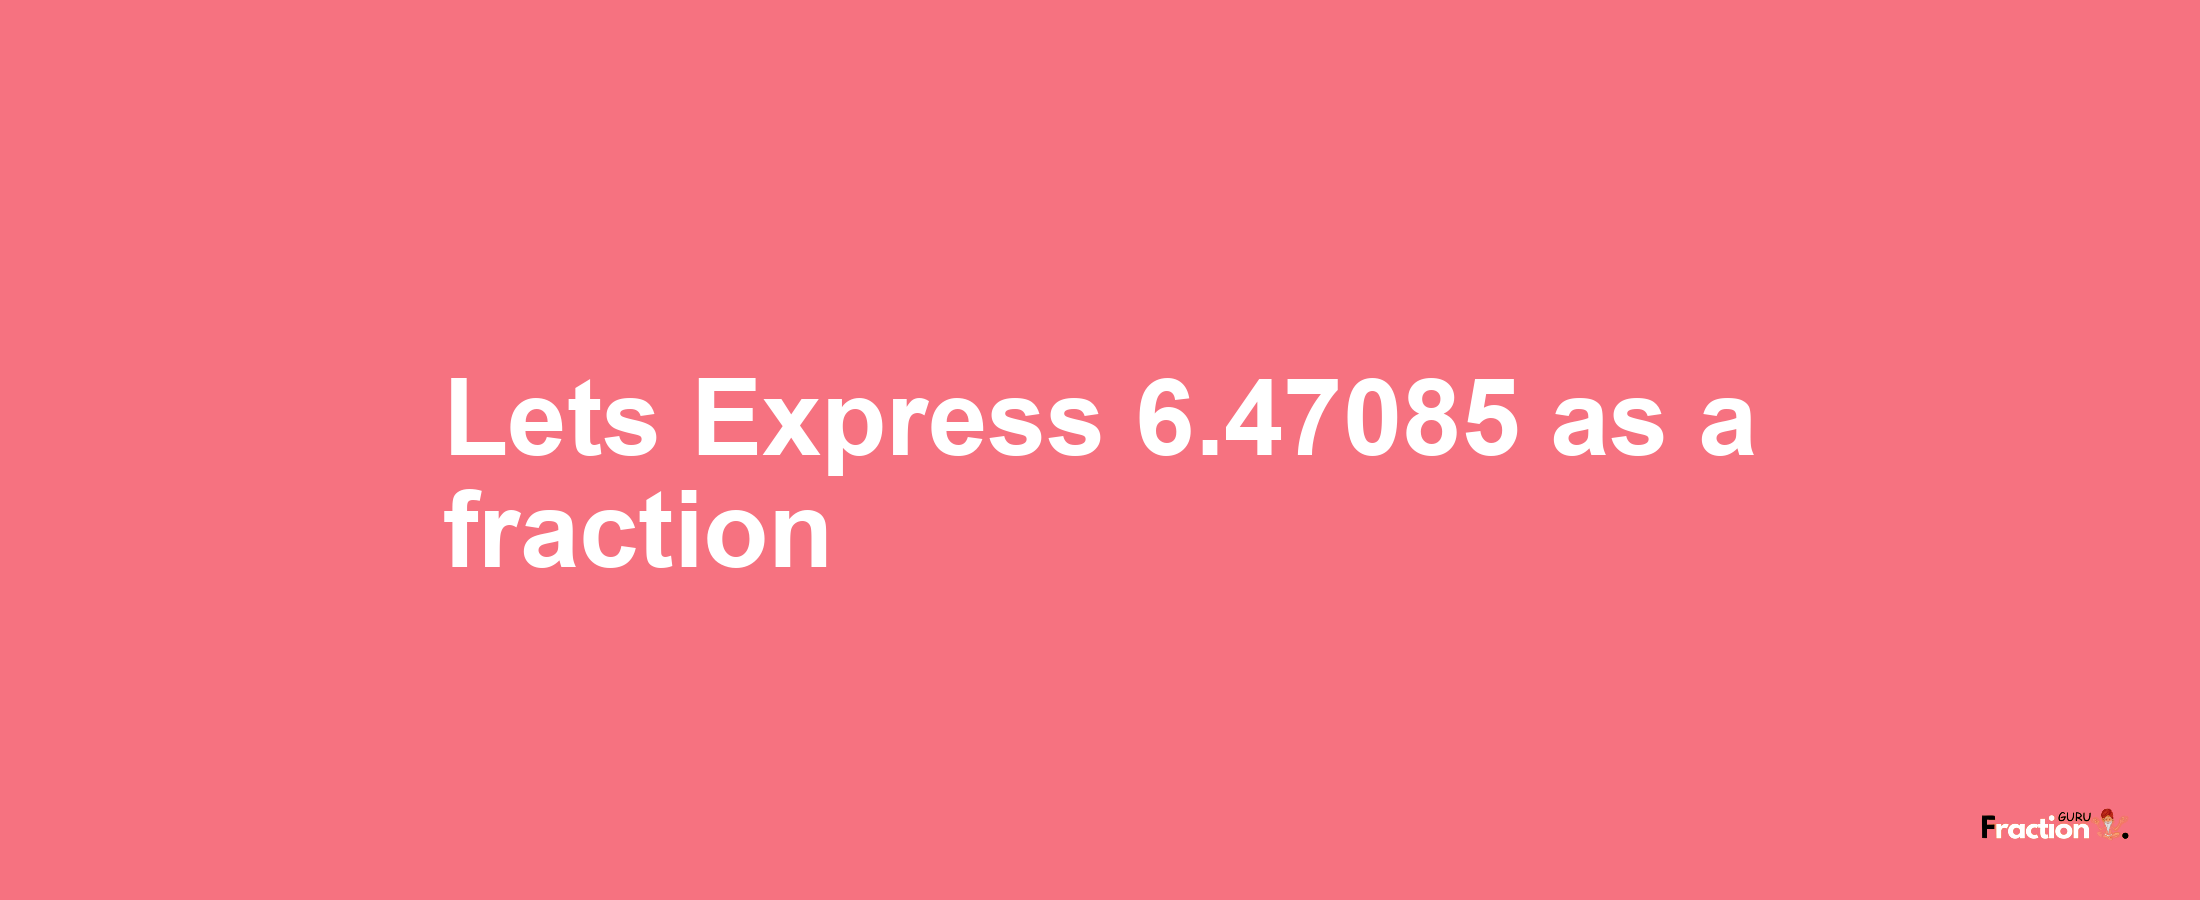 Lets Express 6.47085 as afraction